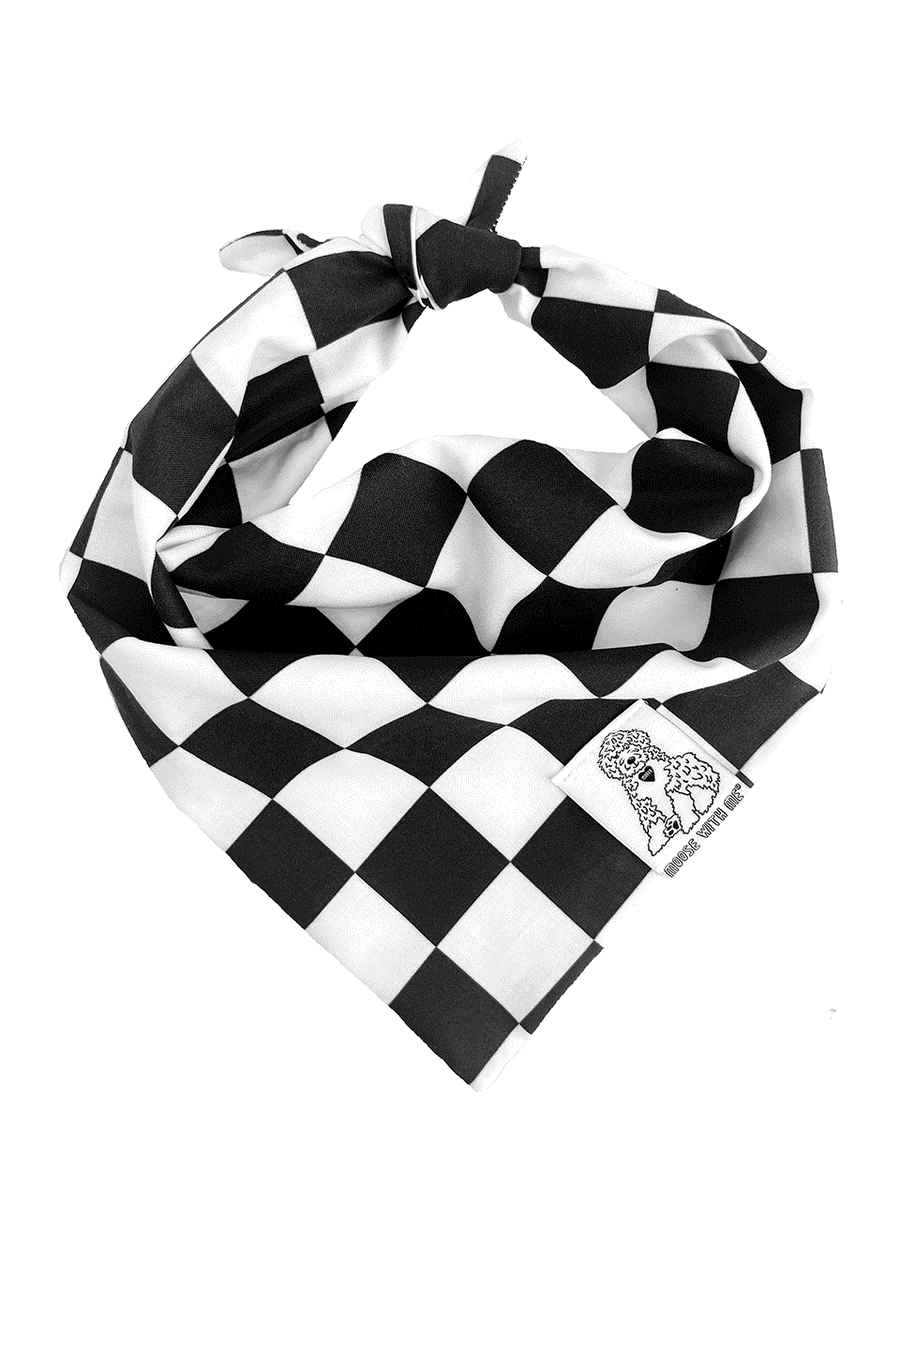 Dog Bandana Checkered Print - Customize with Interchangeable Velcro Patches